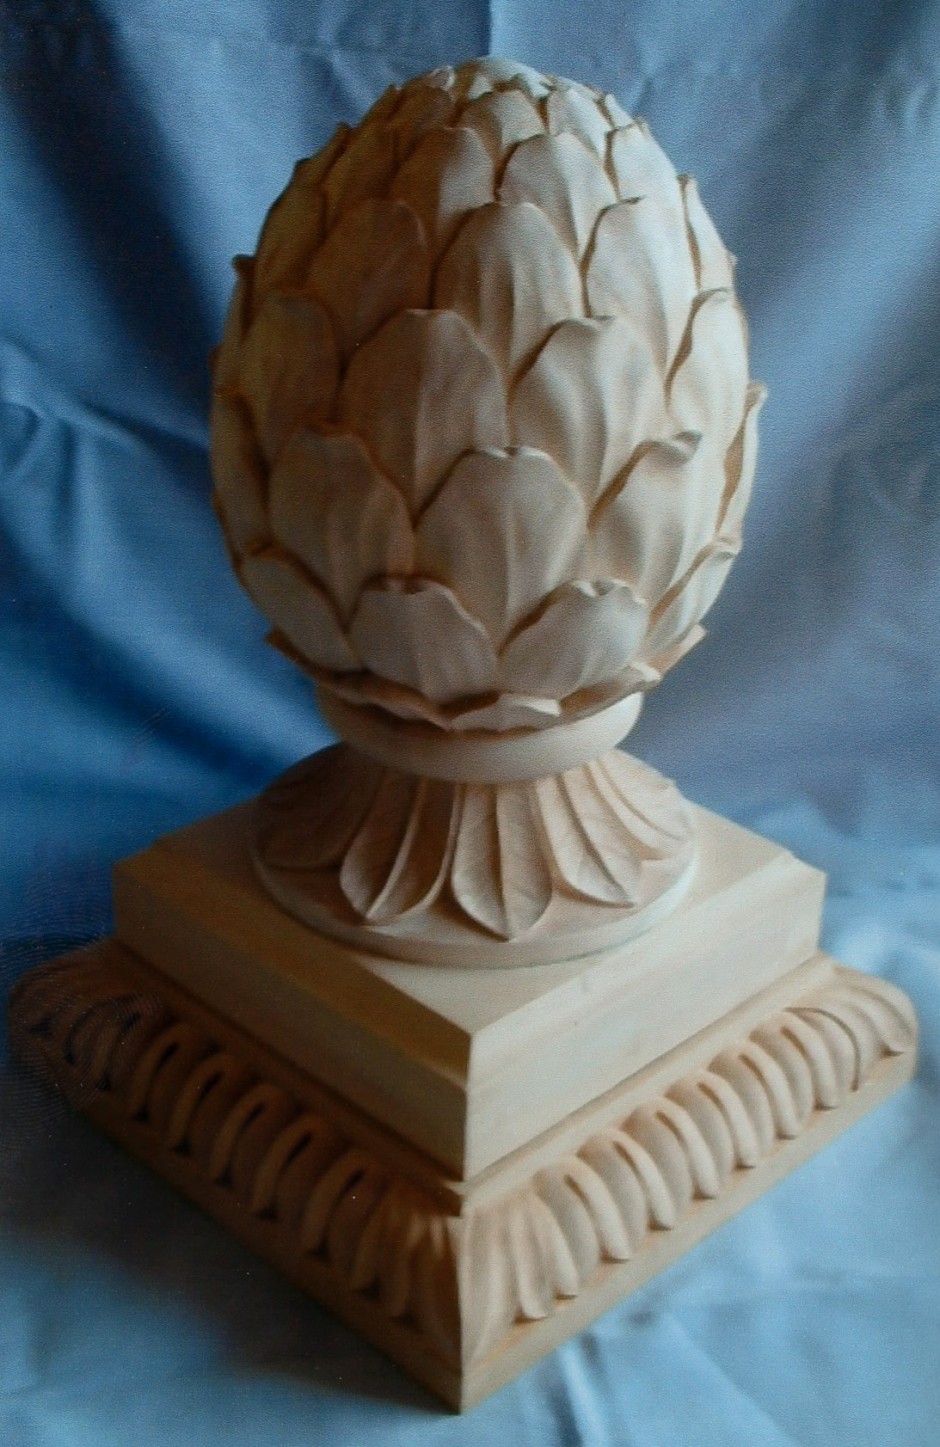 The Finished Ornamental Pineapple - pineapple, ornament, wood carving, stone casting